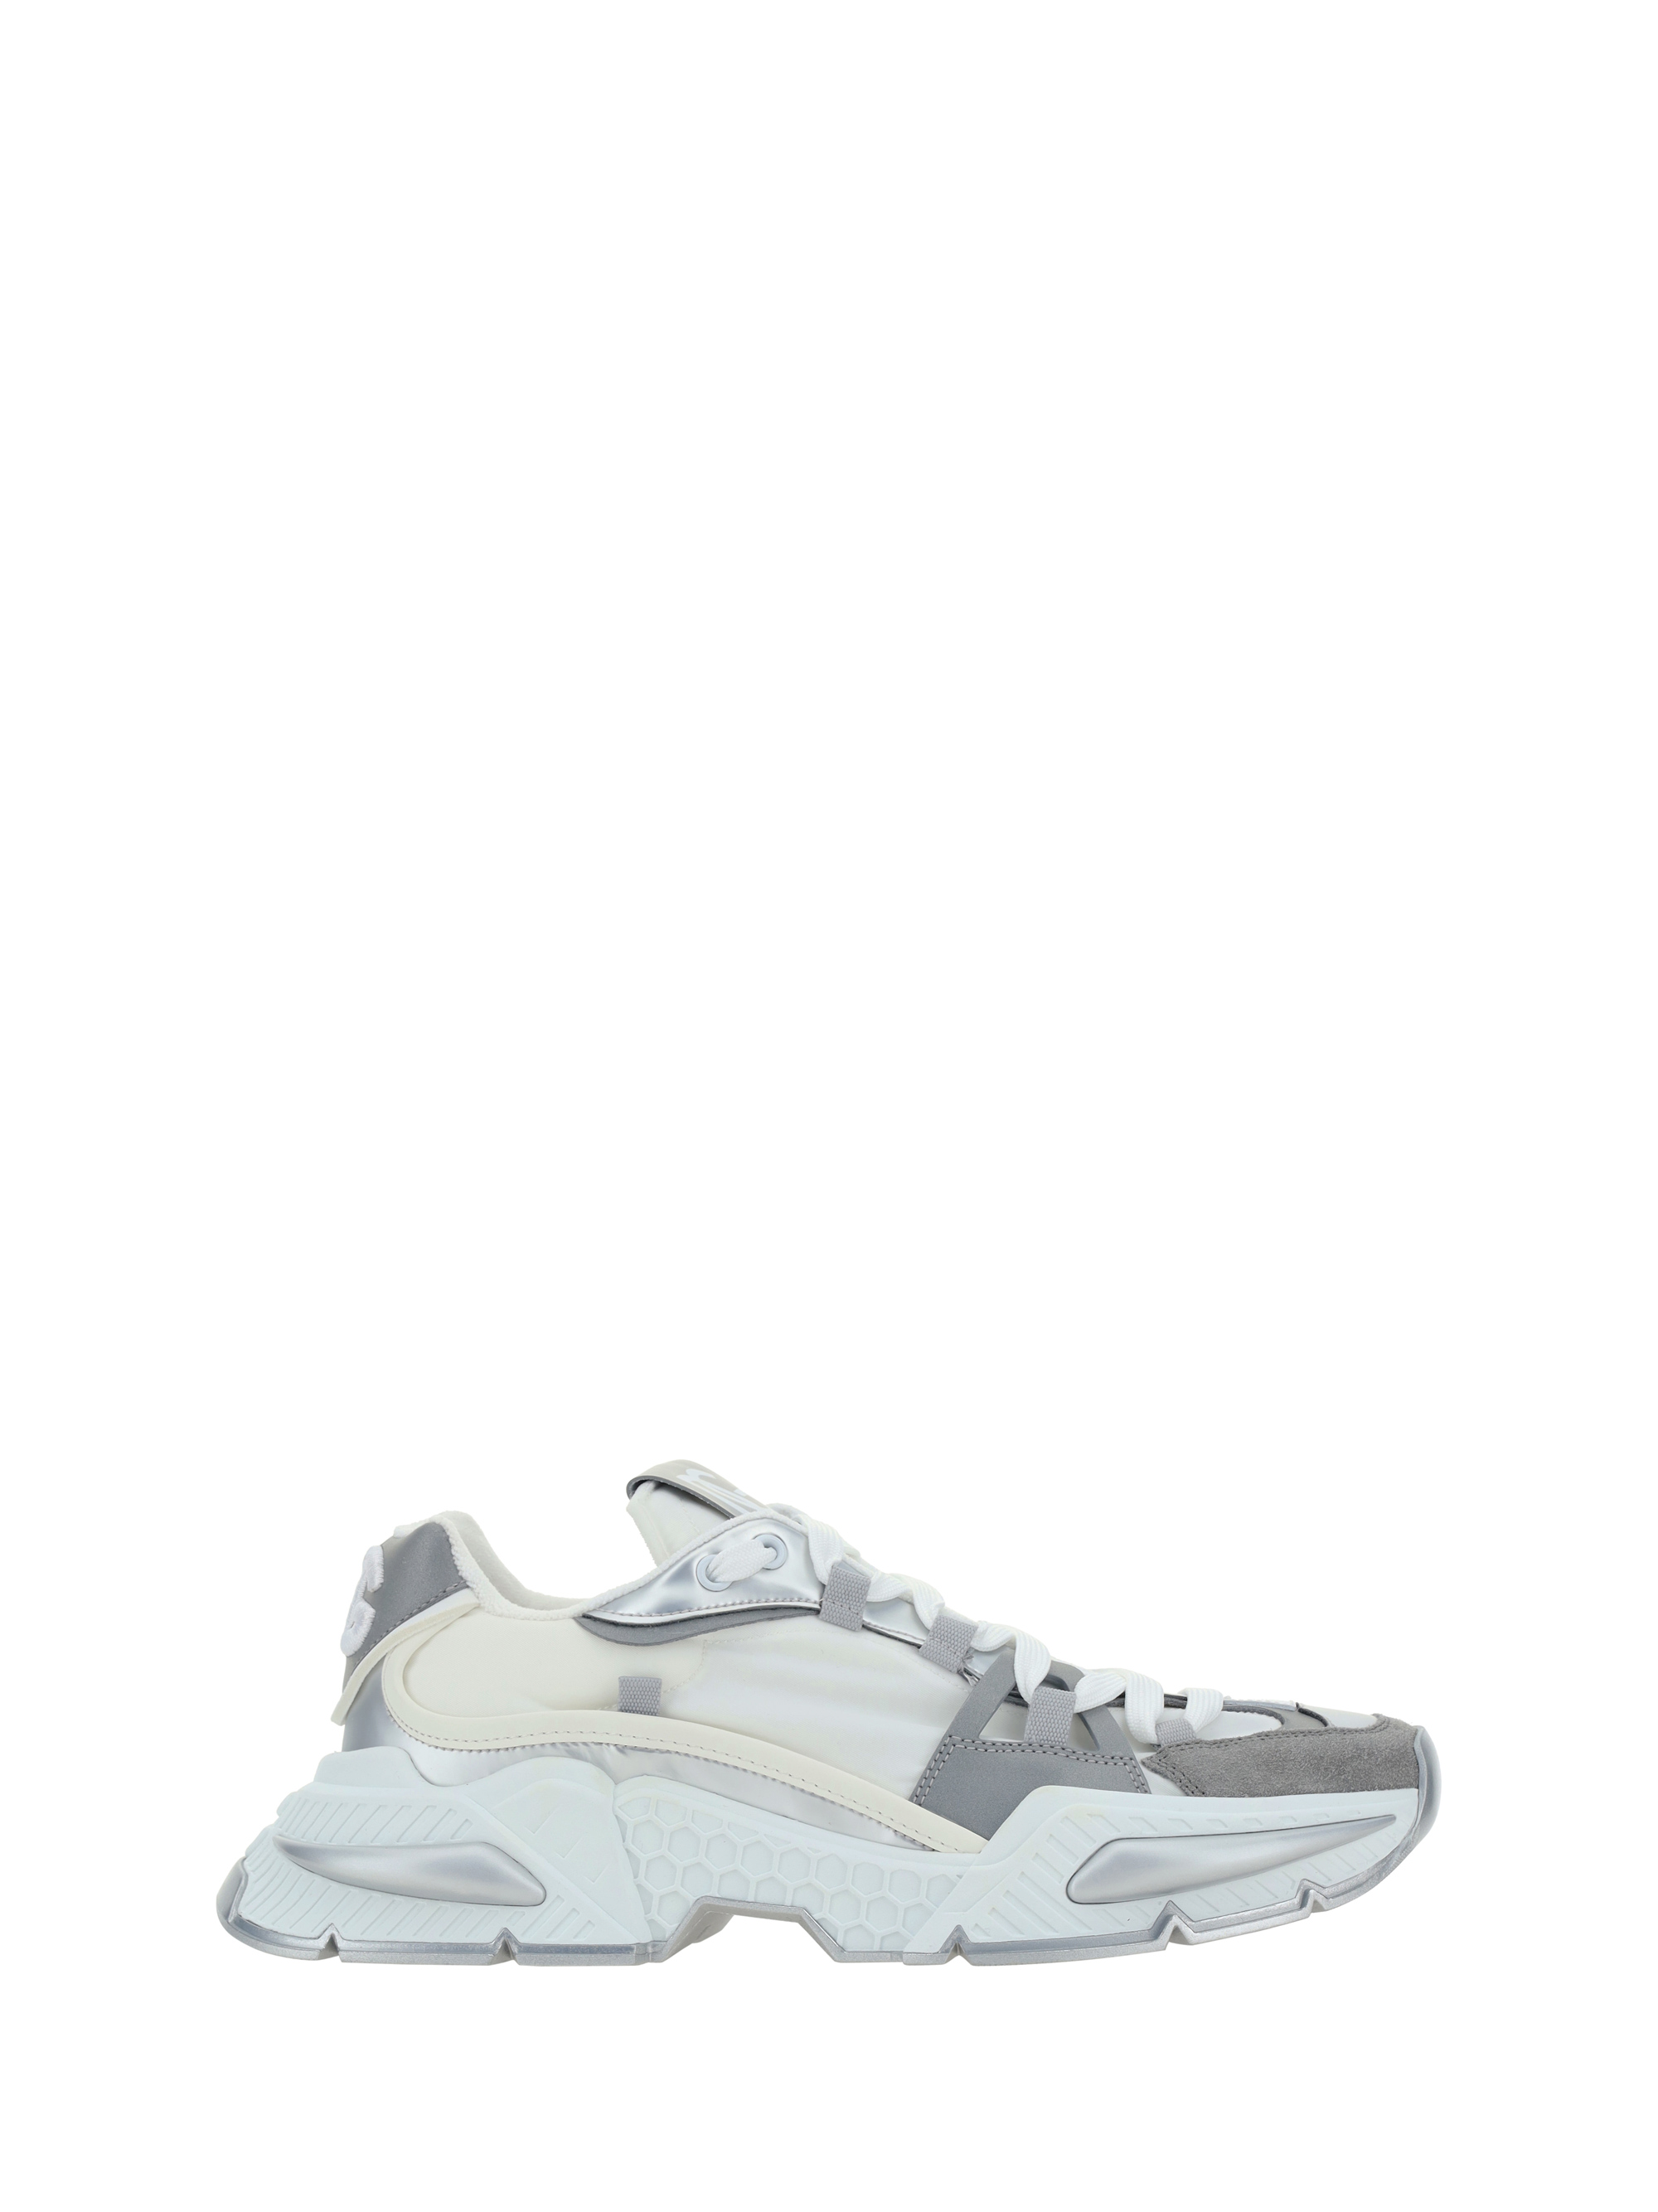 Dolce & Gabbana Sneakers In Argento/bianco